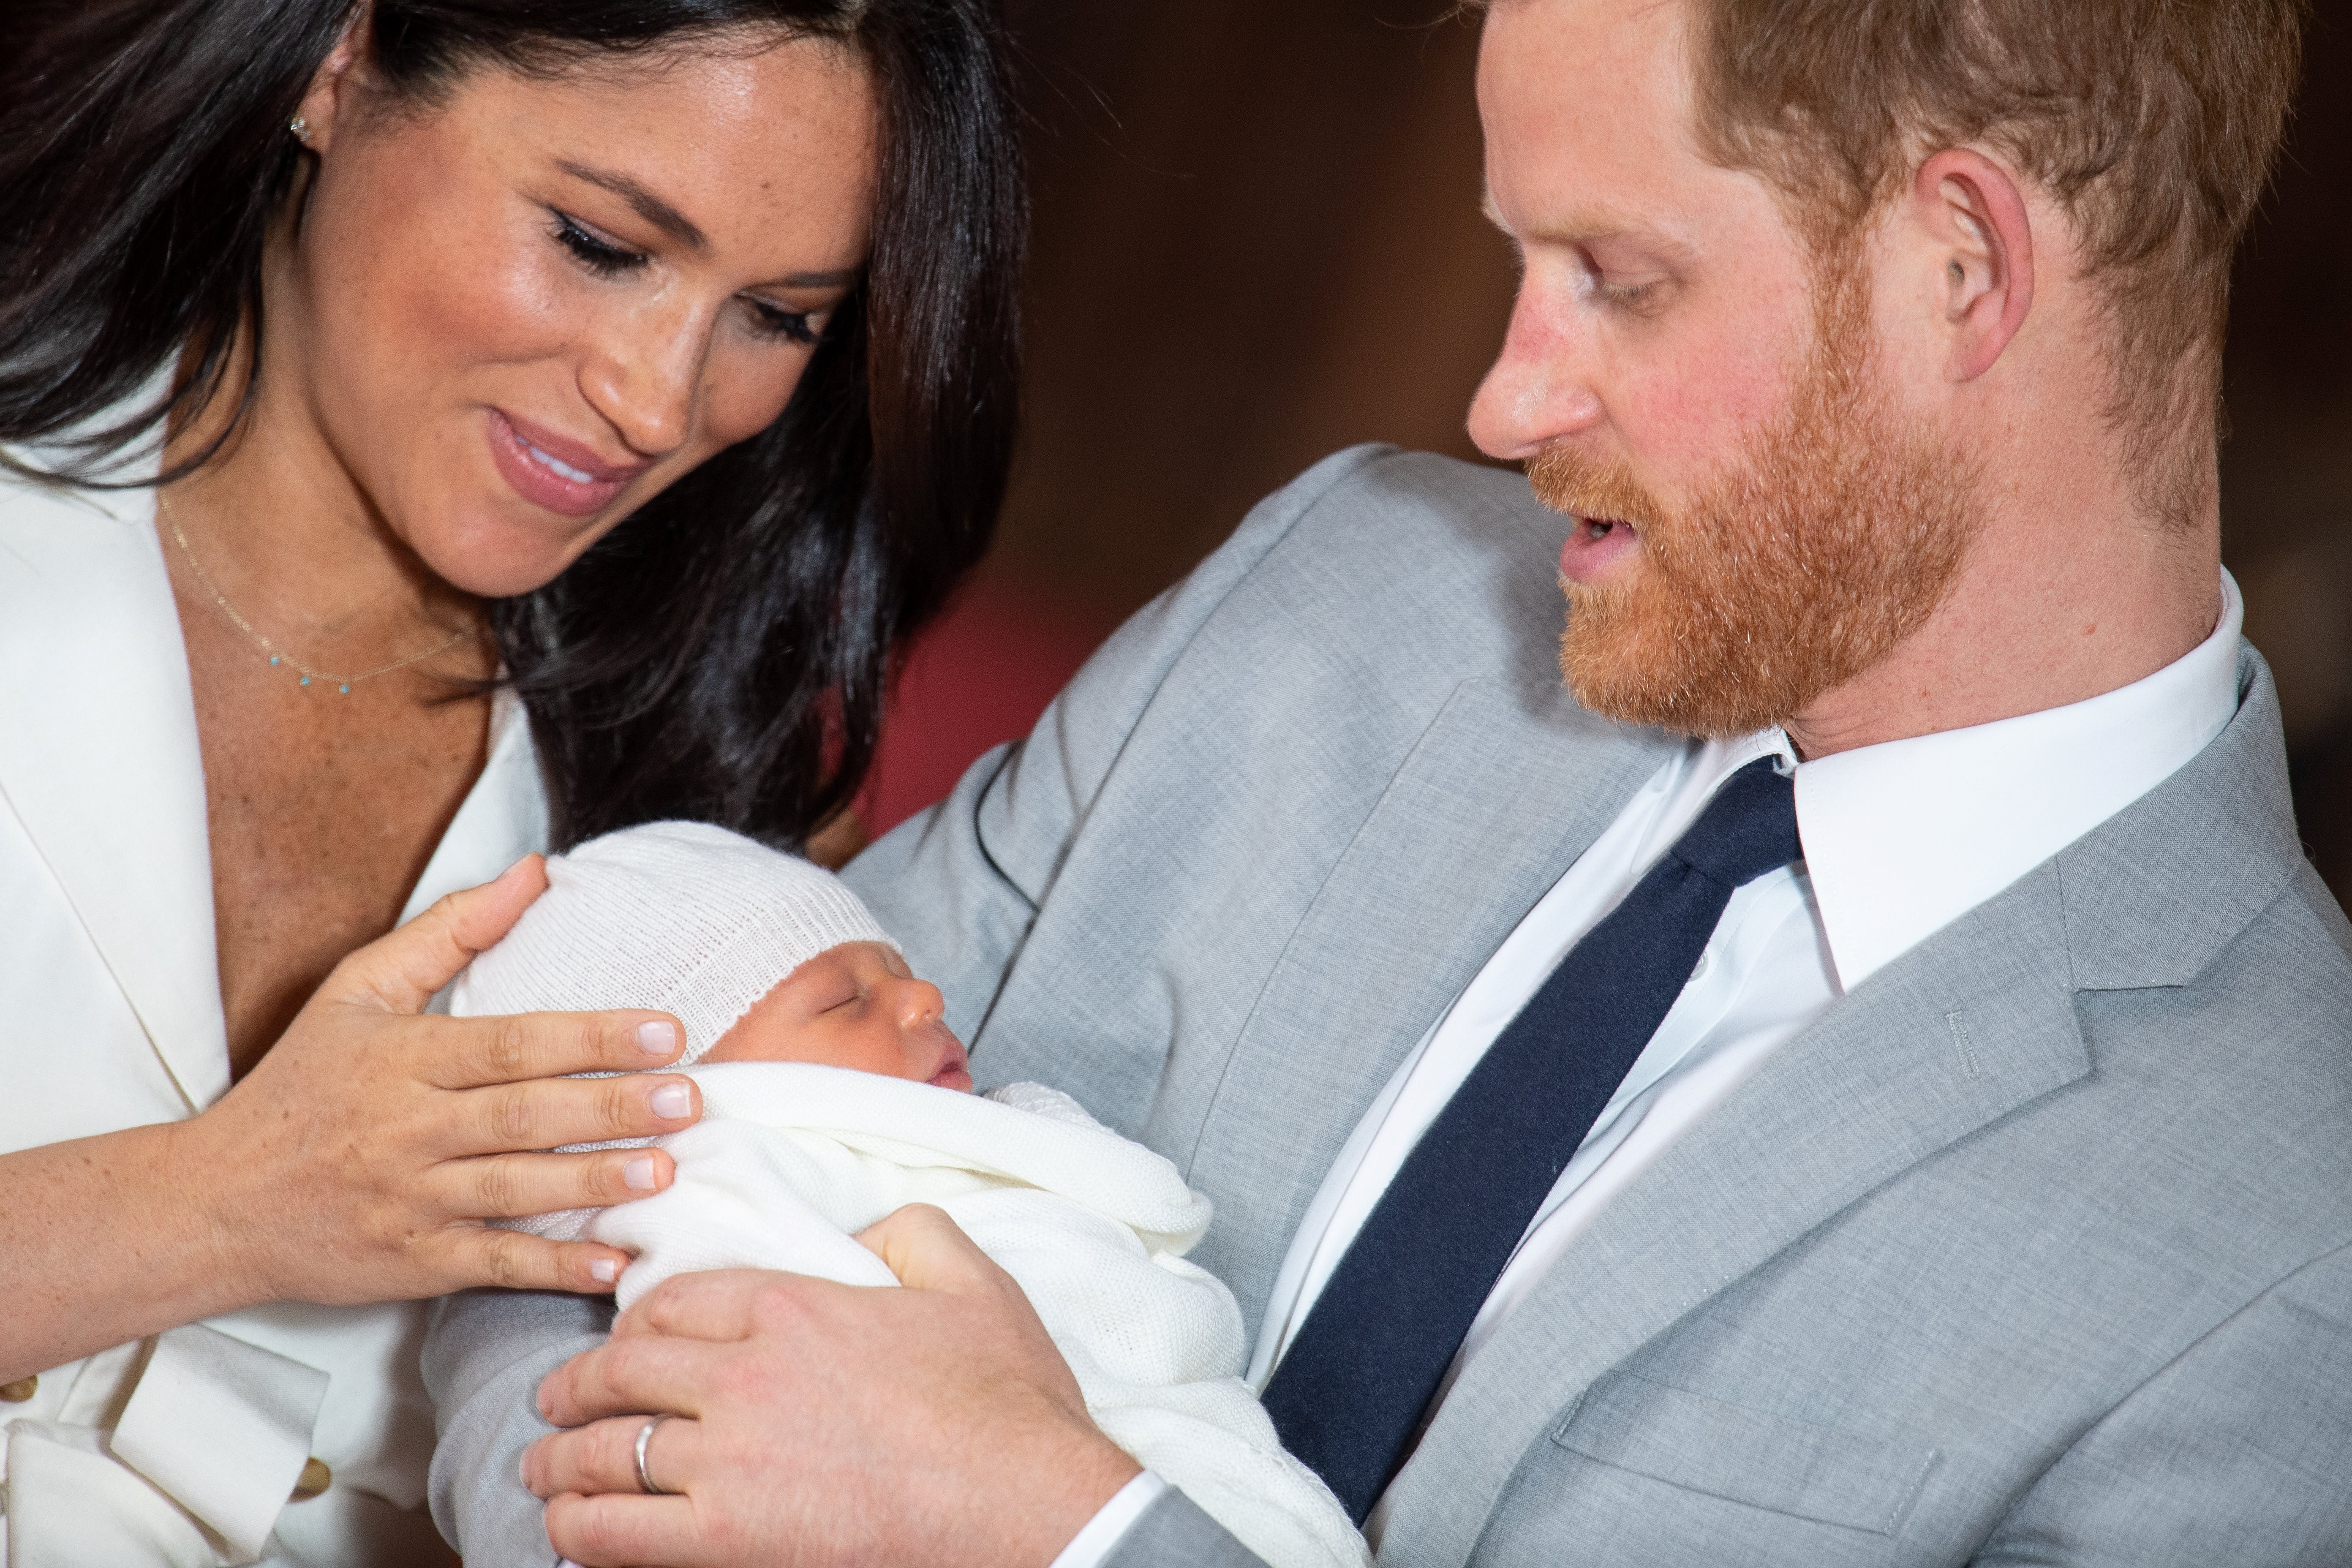 In May, Archie Harrison was born to the Duke and Duchess of Sussex. Photo: AFP